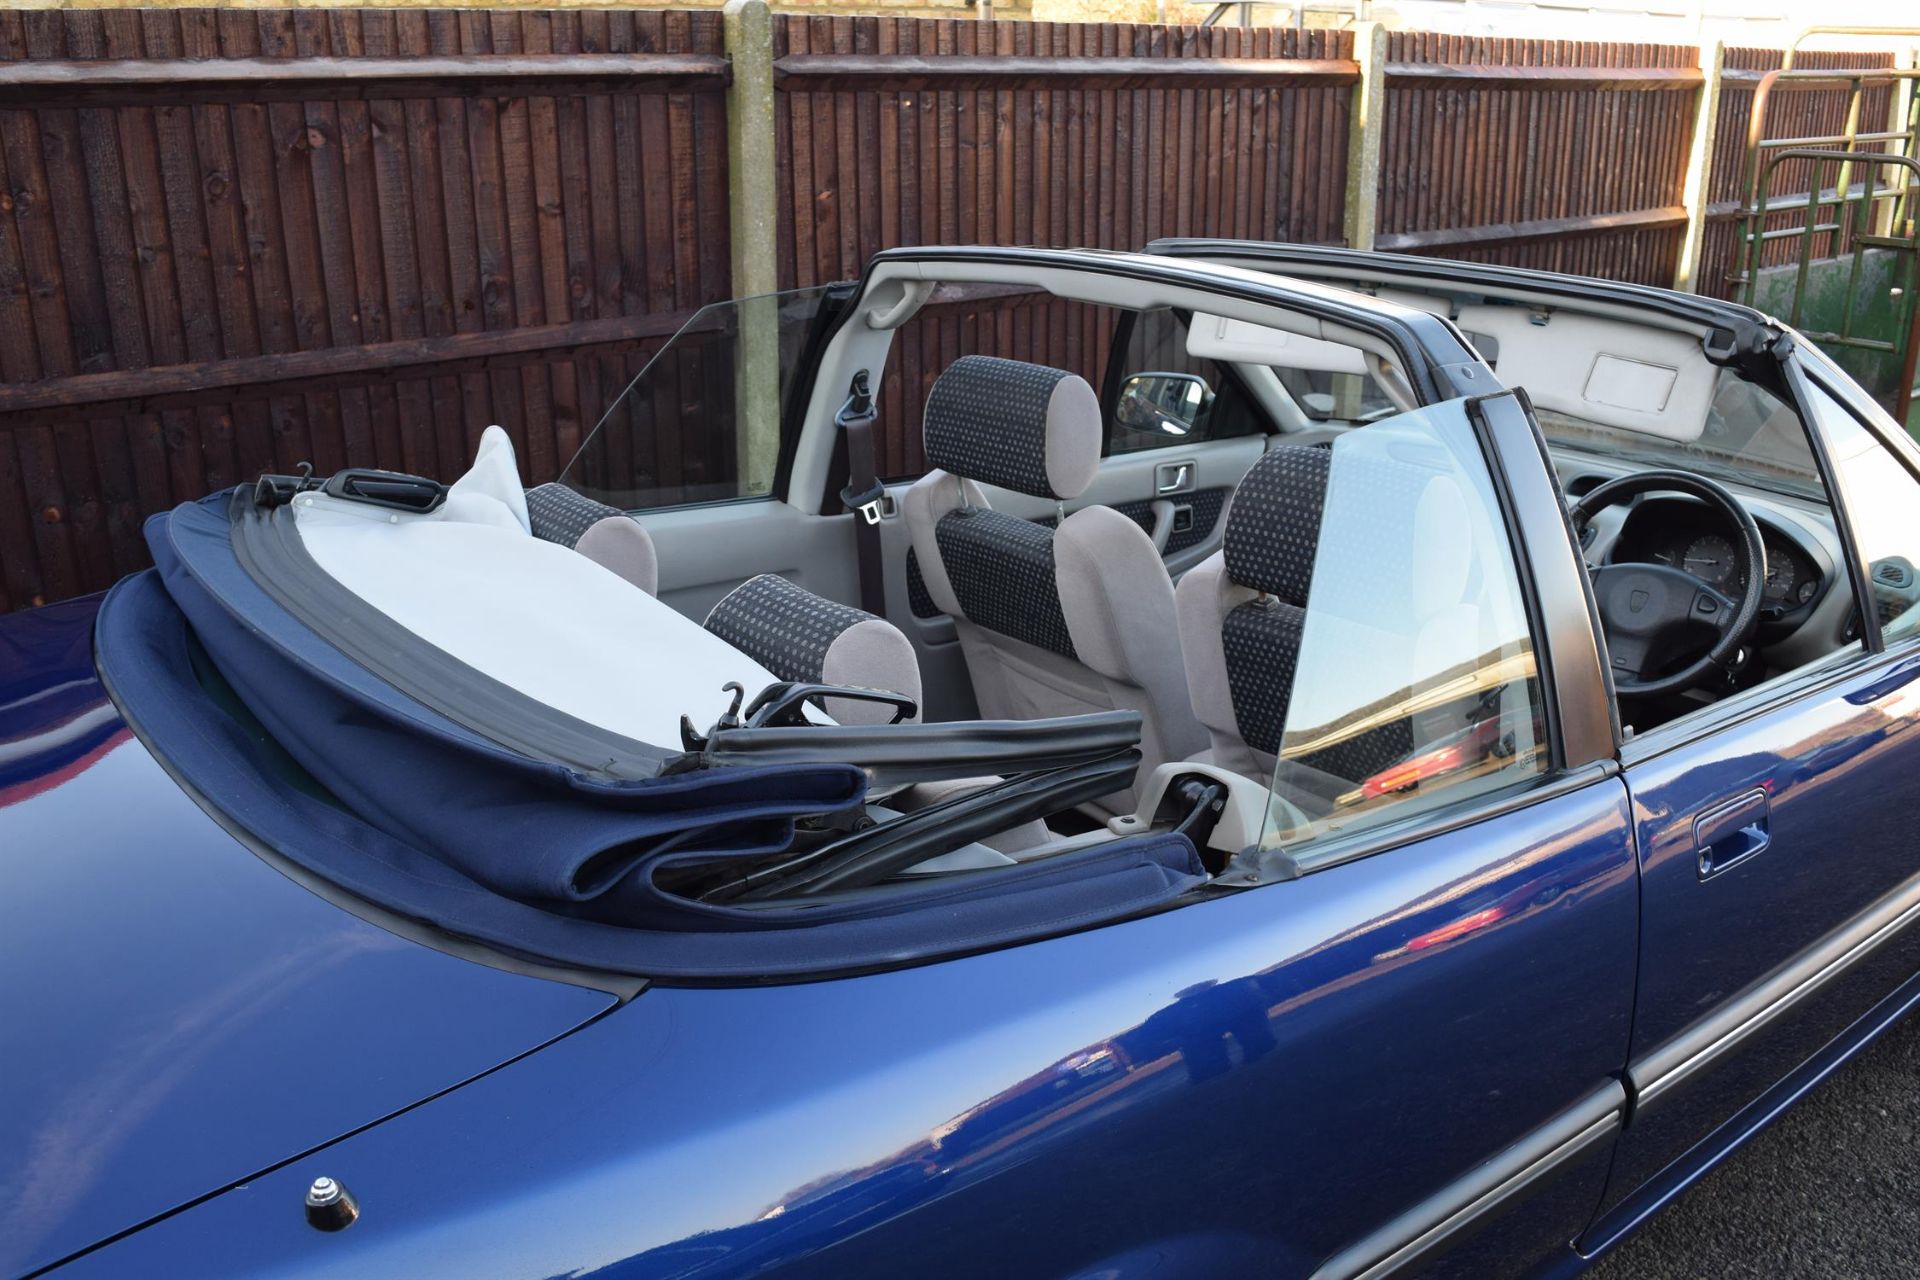 1996 Rover 216 Cabriolet - Image 11 of 25